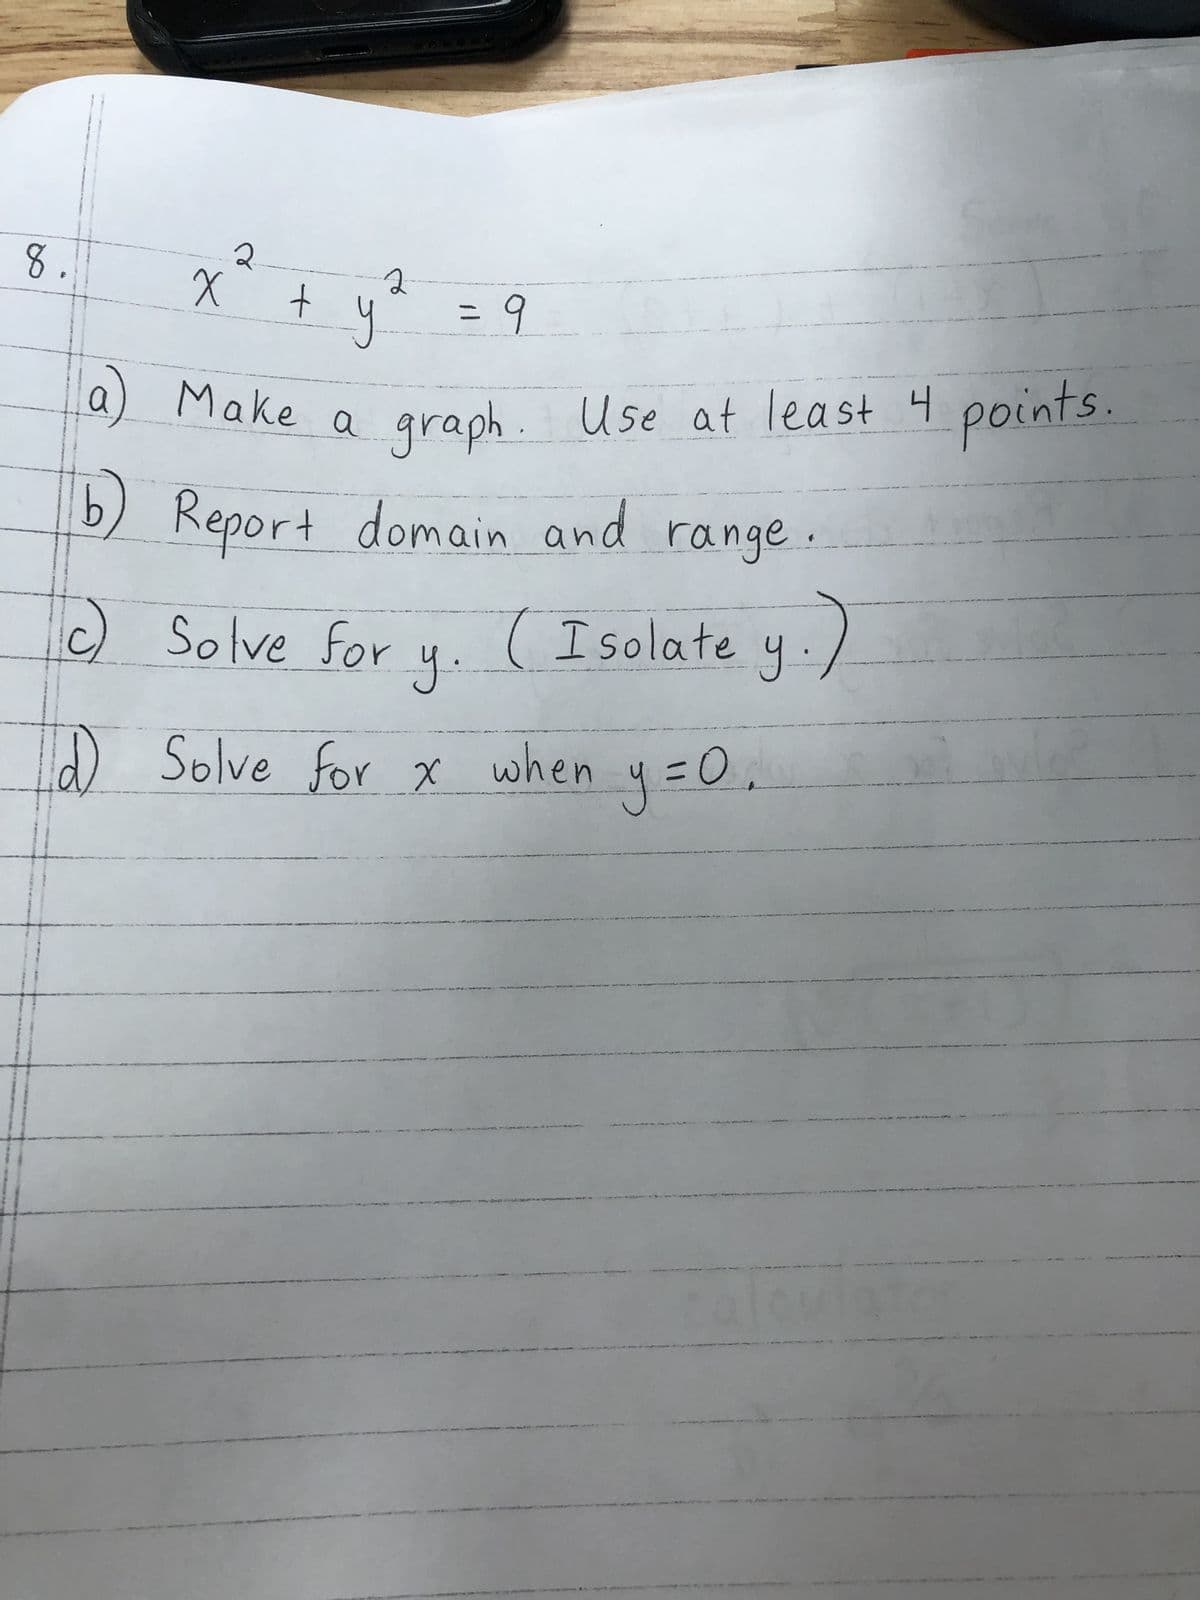 8.
X
2
+
2
y
a) Make a
a
= 9
graph. Use at least 4 points.
b) Report domain and range
Isolate y.)
c) Solve for
D
y.
Solve for x when y = 0